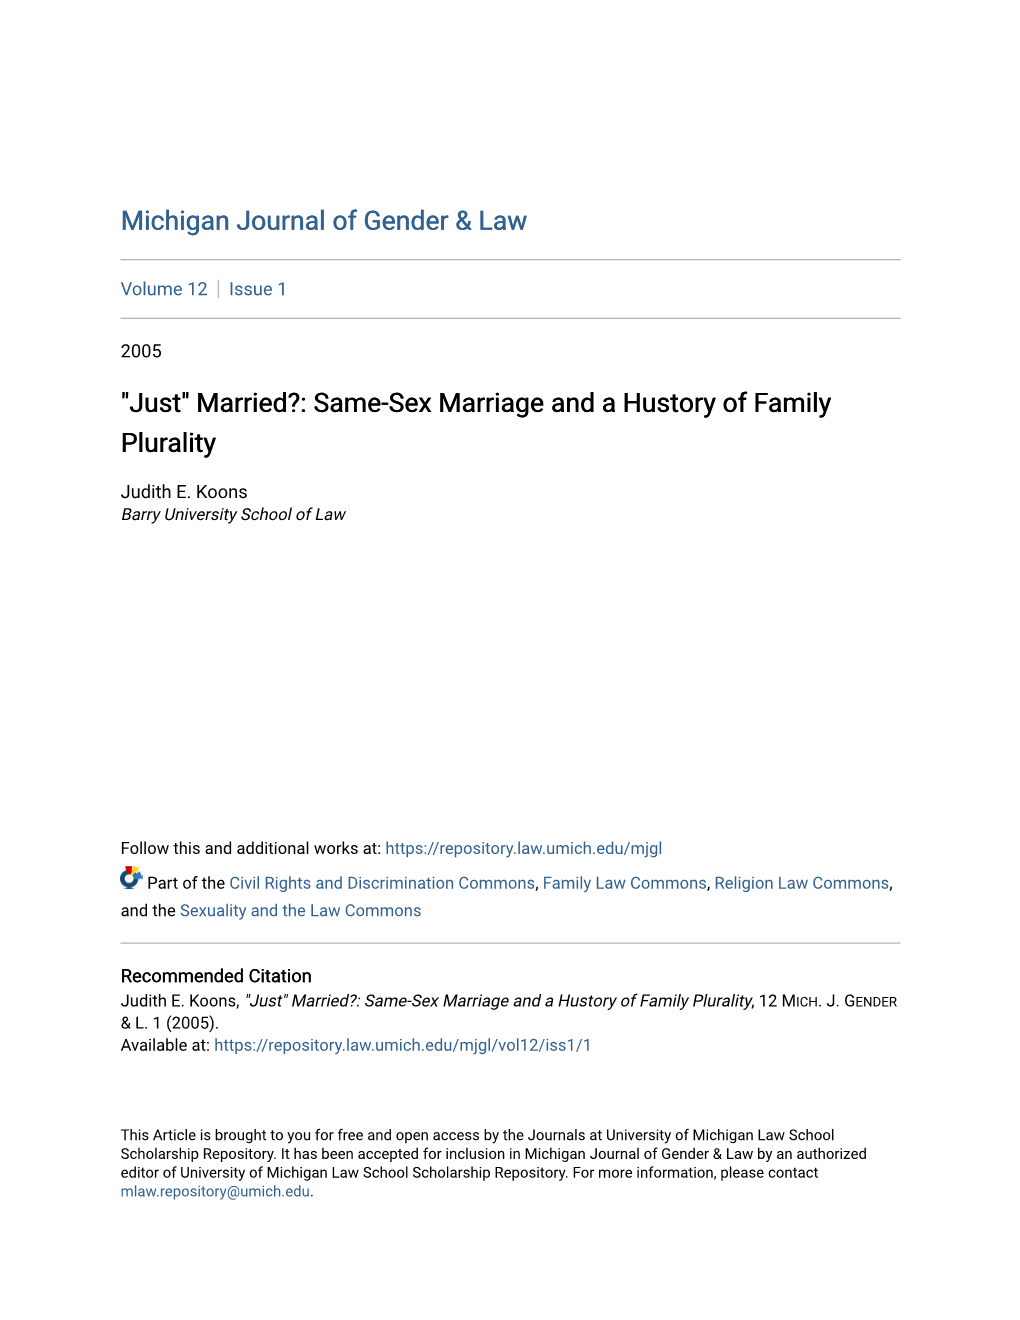 "Just" Married?: Same-Sex Marriage and a Hustory of Family Plurality